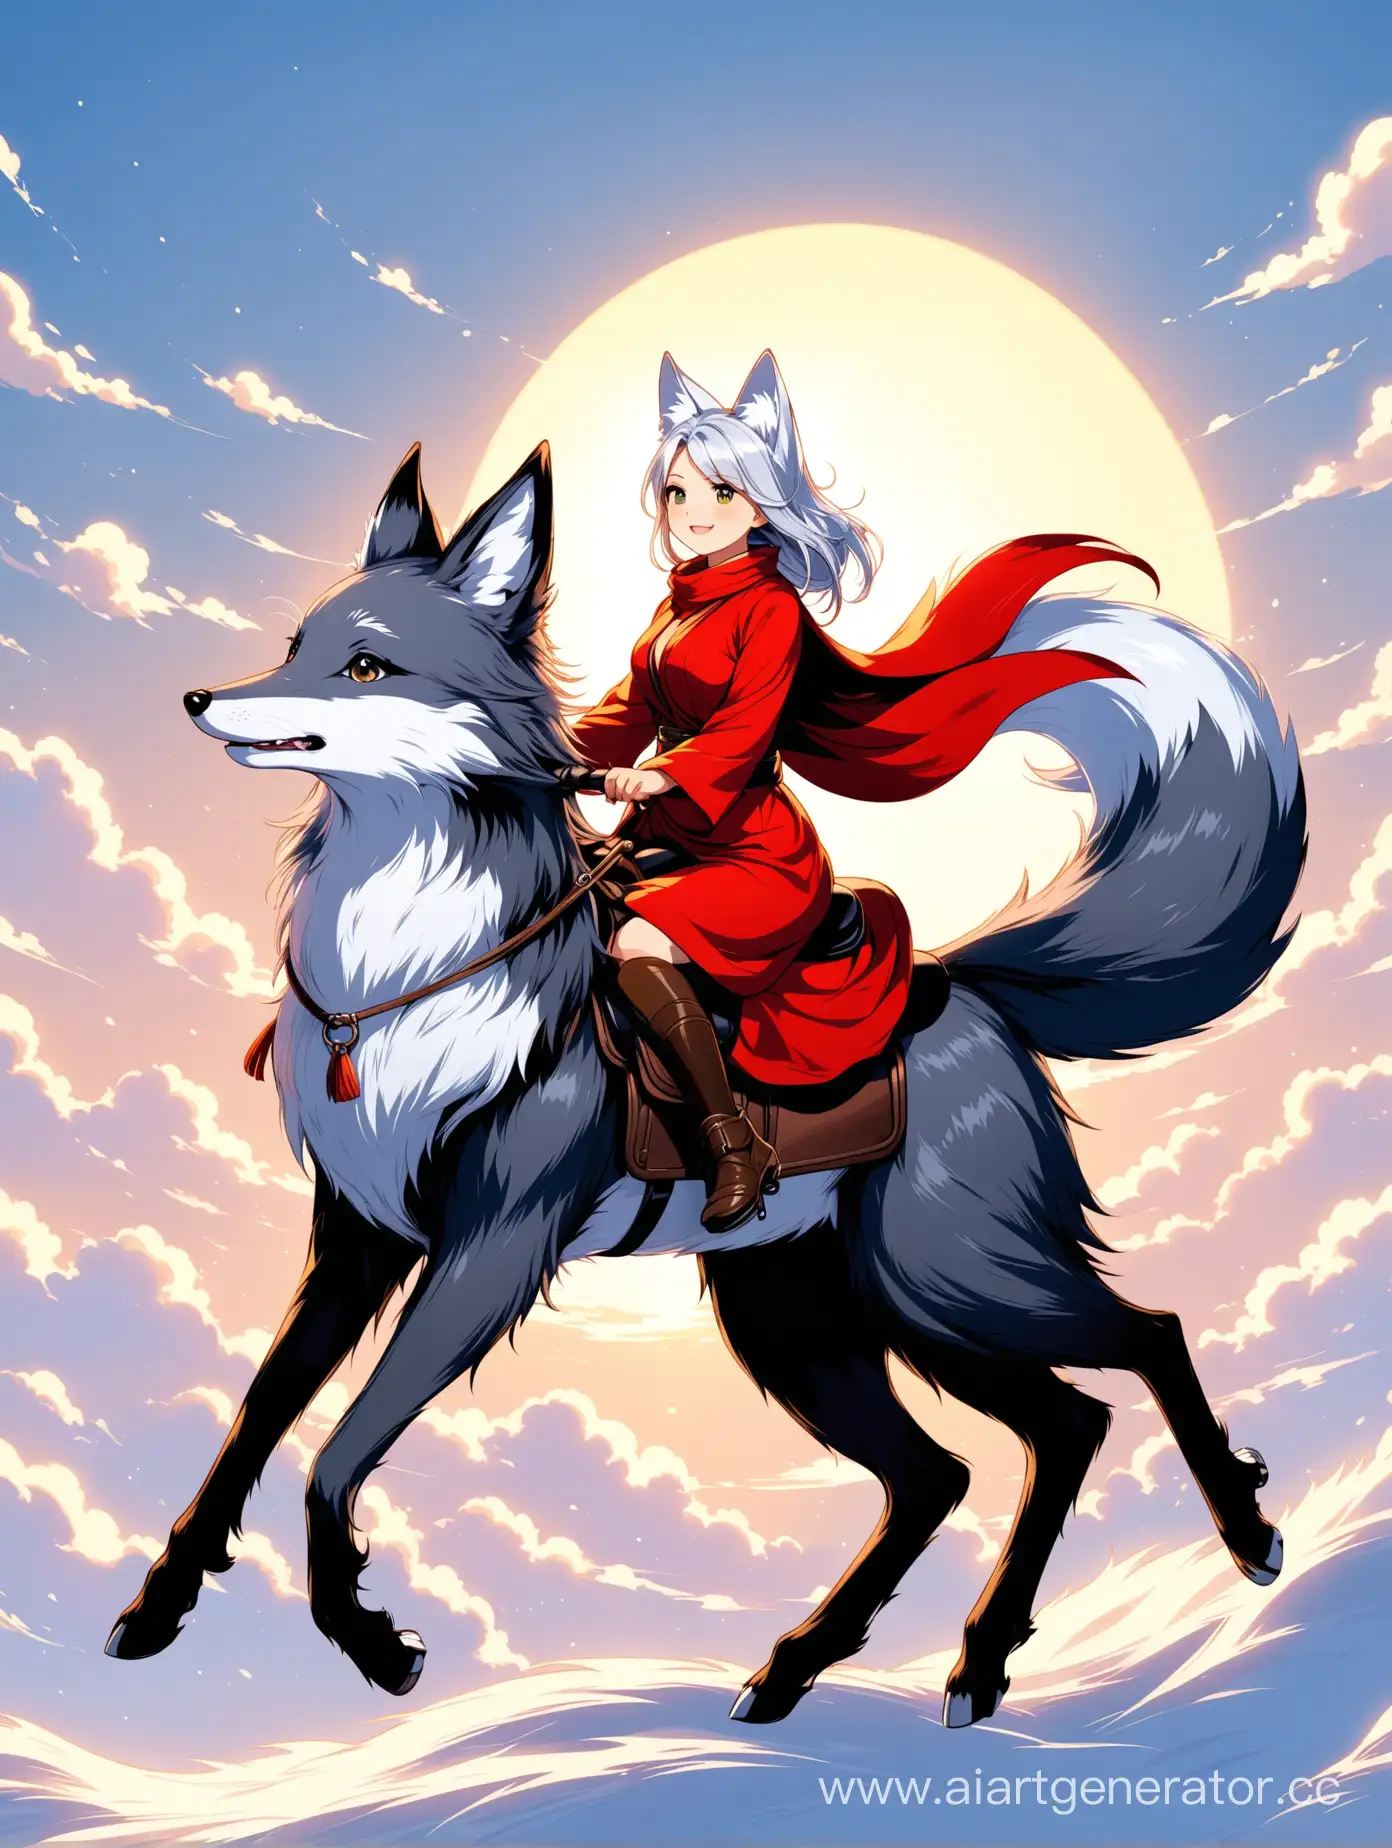 Silver-Fox-Riding-Majestic-Beast-in-Surreal-Art